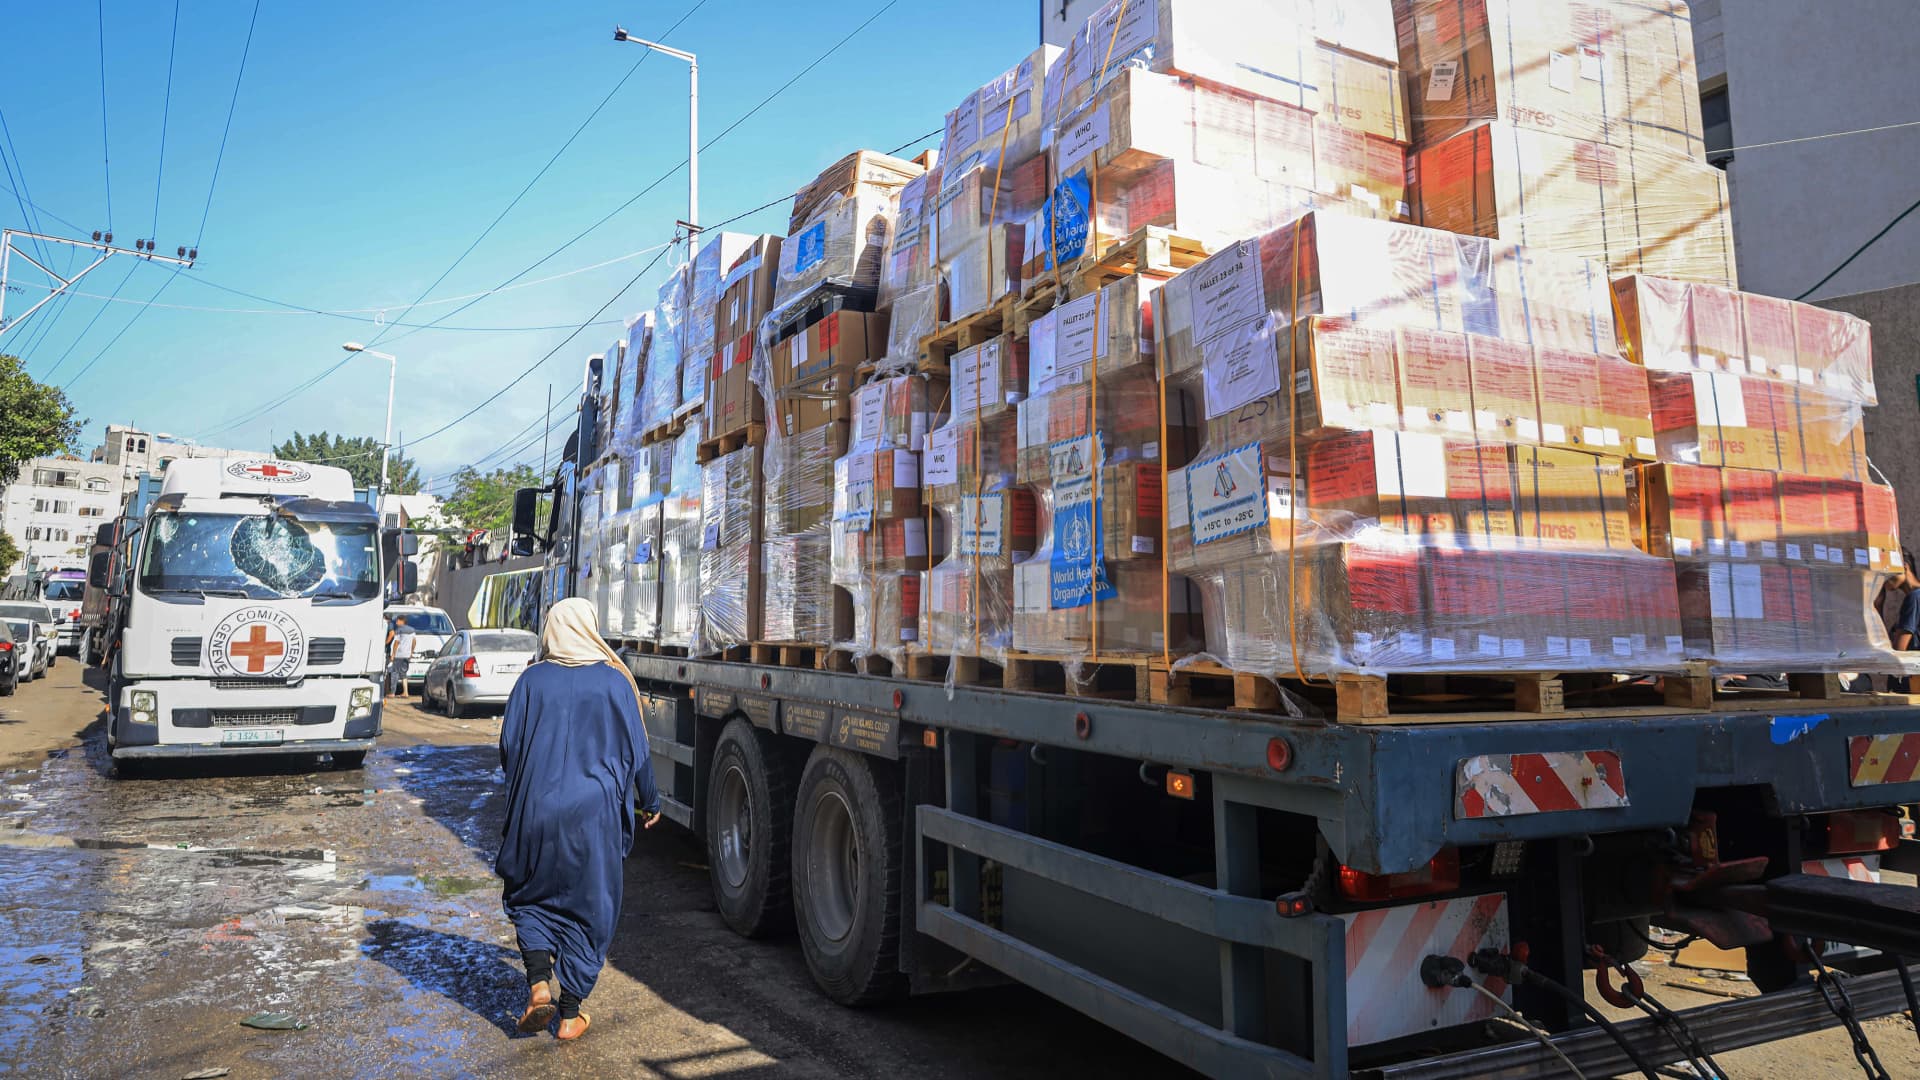 The UN stops delivery of food and supplies to Gaza